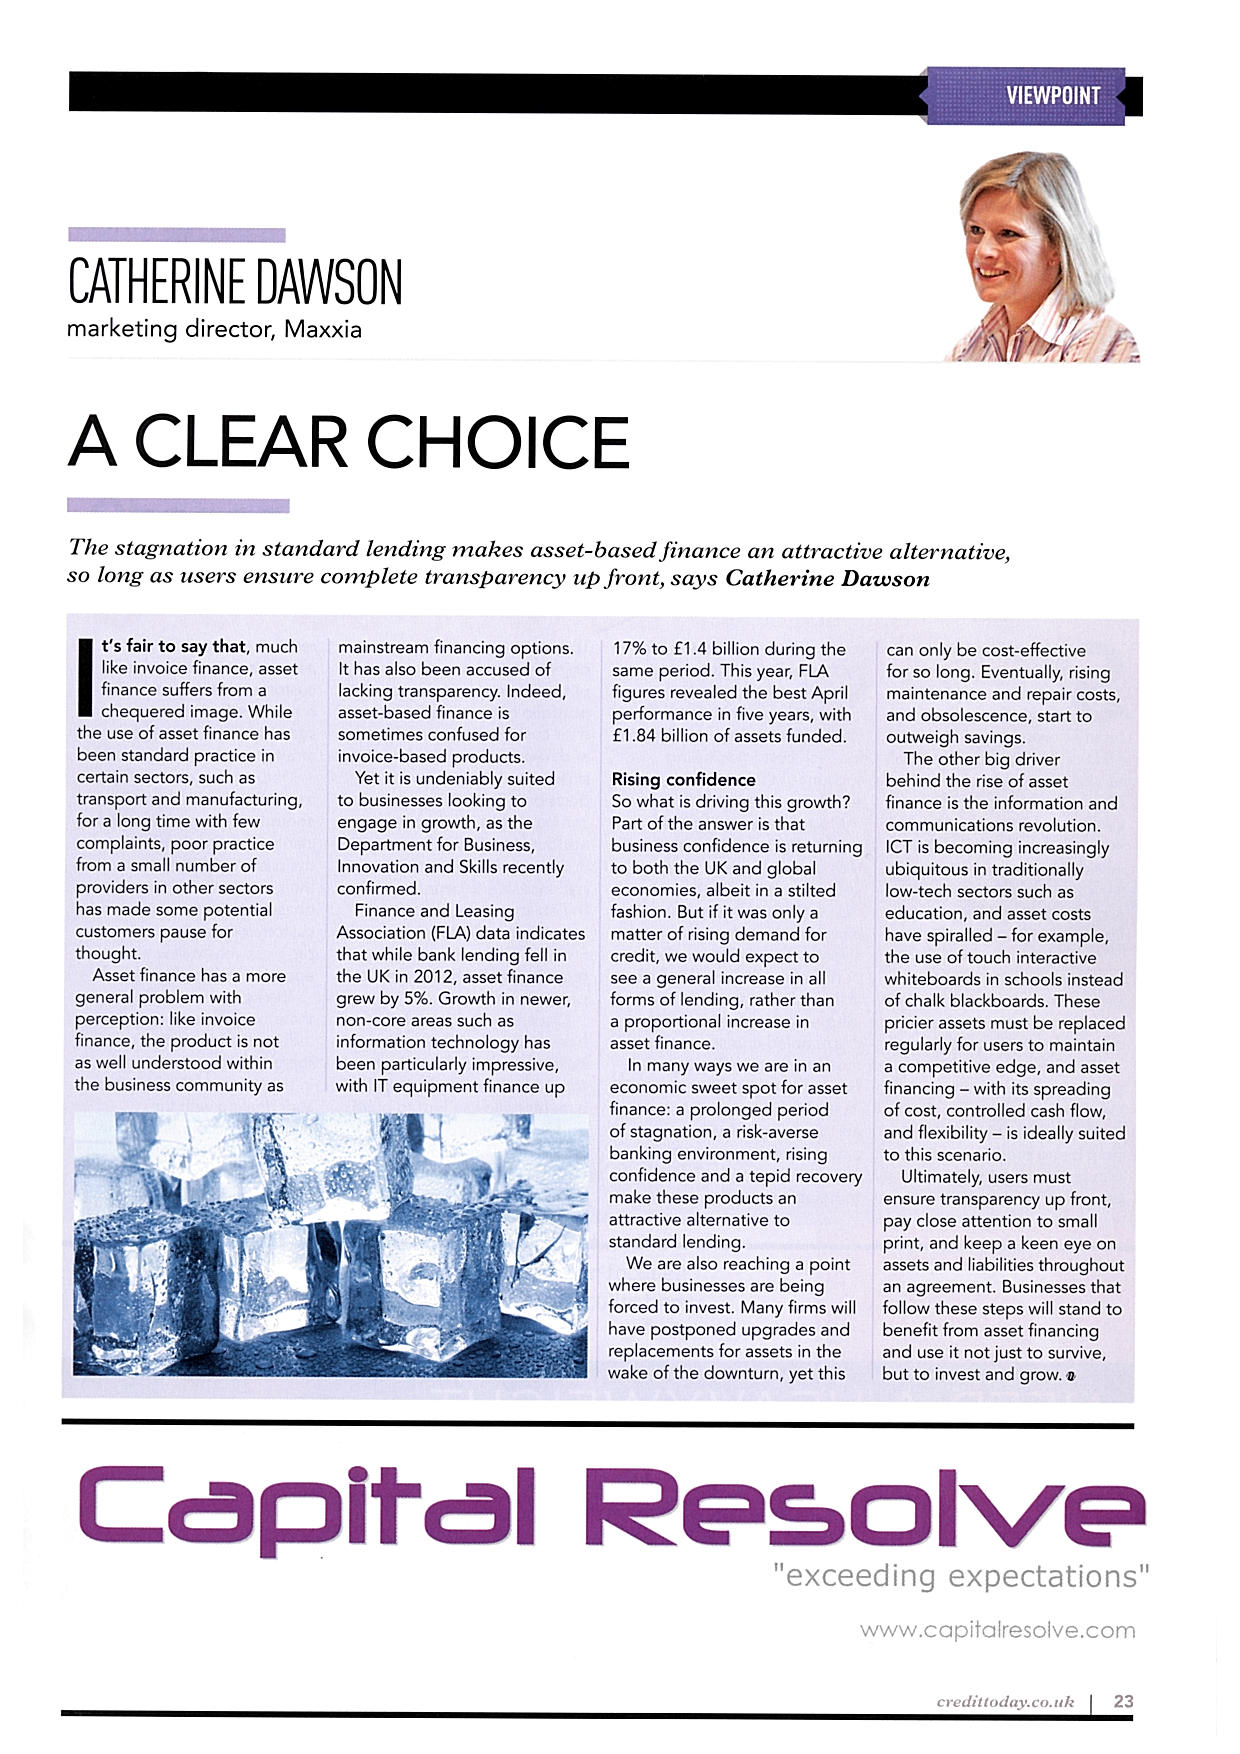 1309 Credit Today Magazine - A Clear Choice